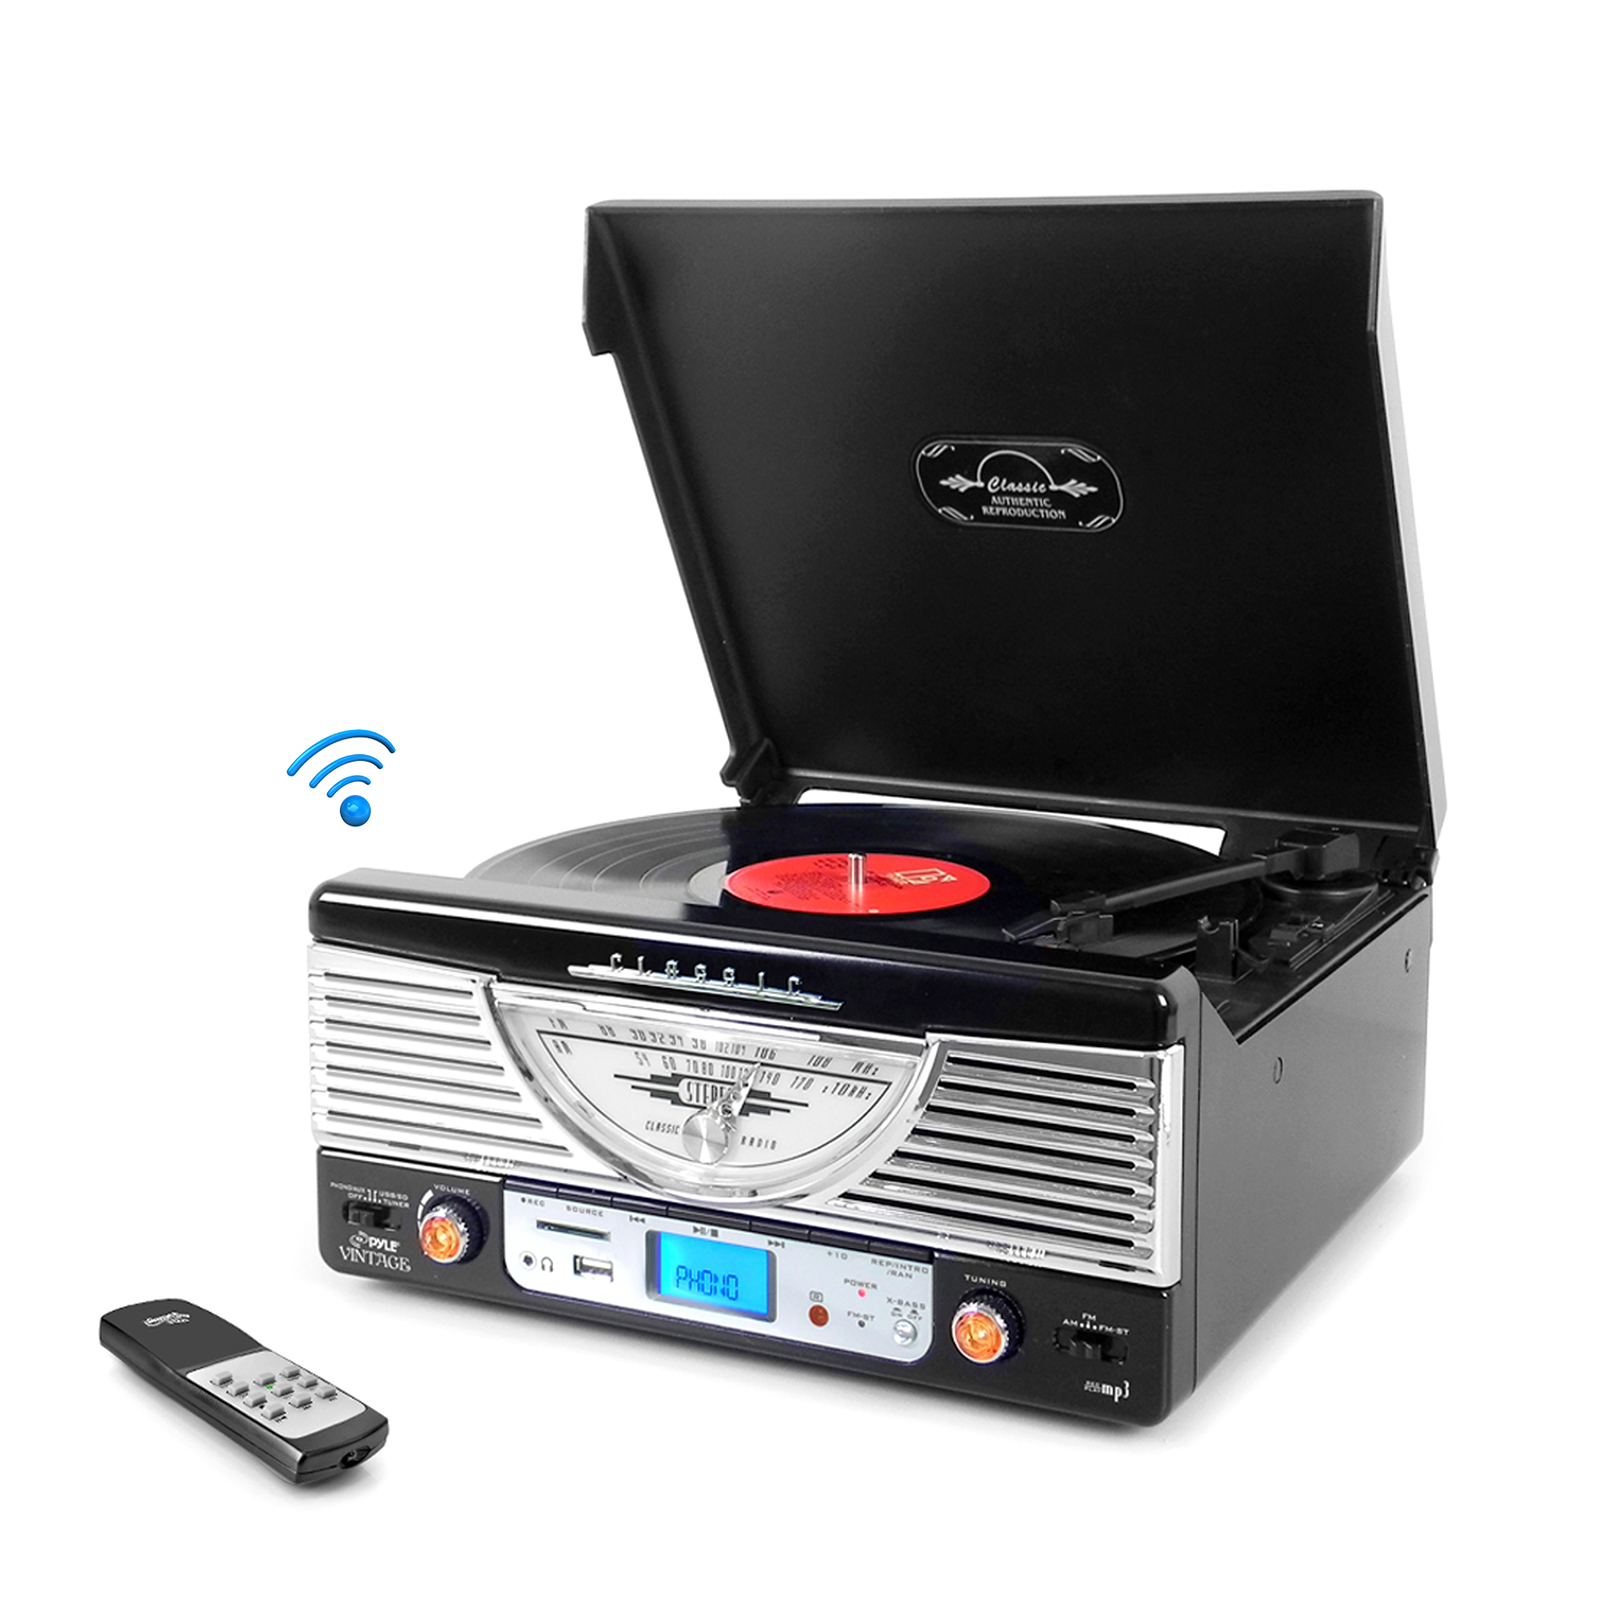 Retro Vintage Classic Style BT Turntable Vinyl Record Player with USB/MP3 Computer Recording (Black) - image 1 of 1